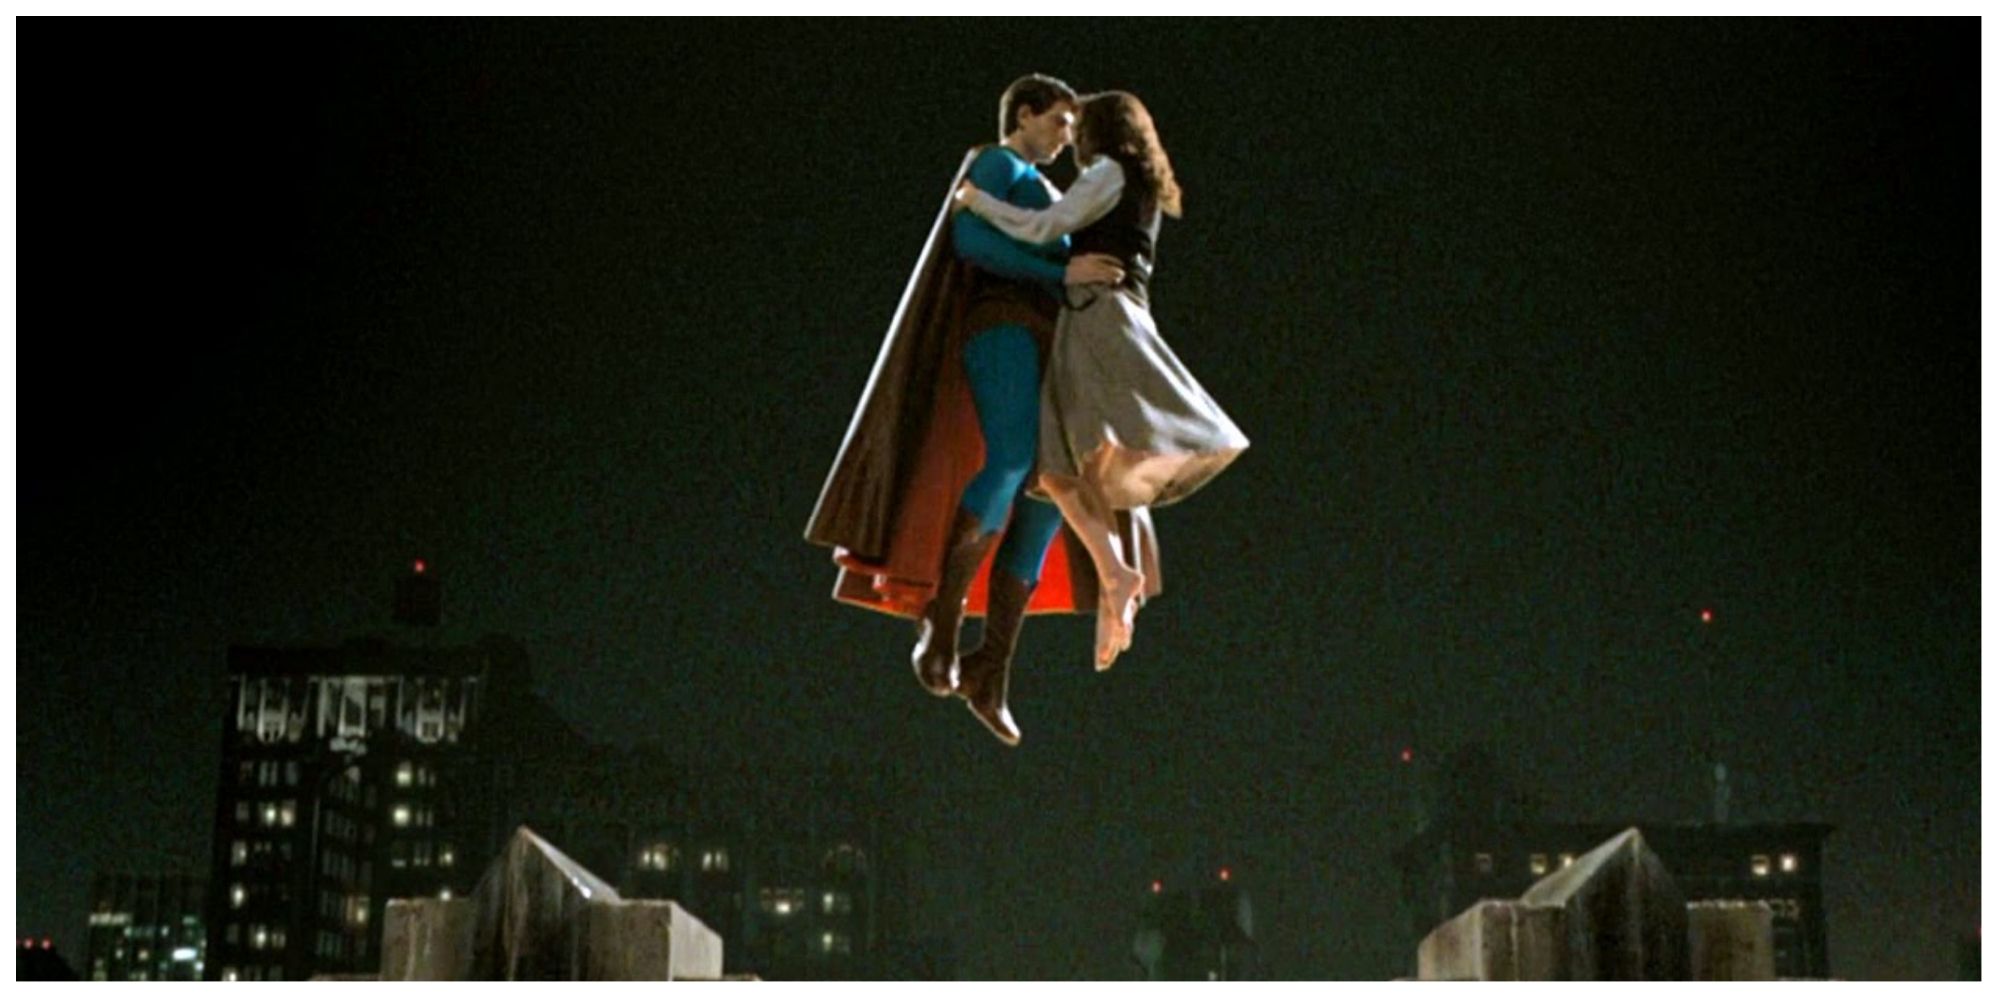 Brandon Routh as Superman and Kate Bosworth as Lois Lane in Superman Returns